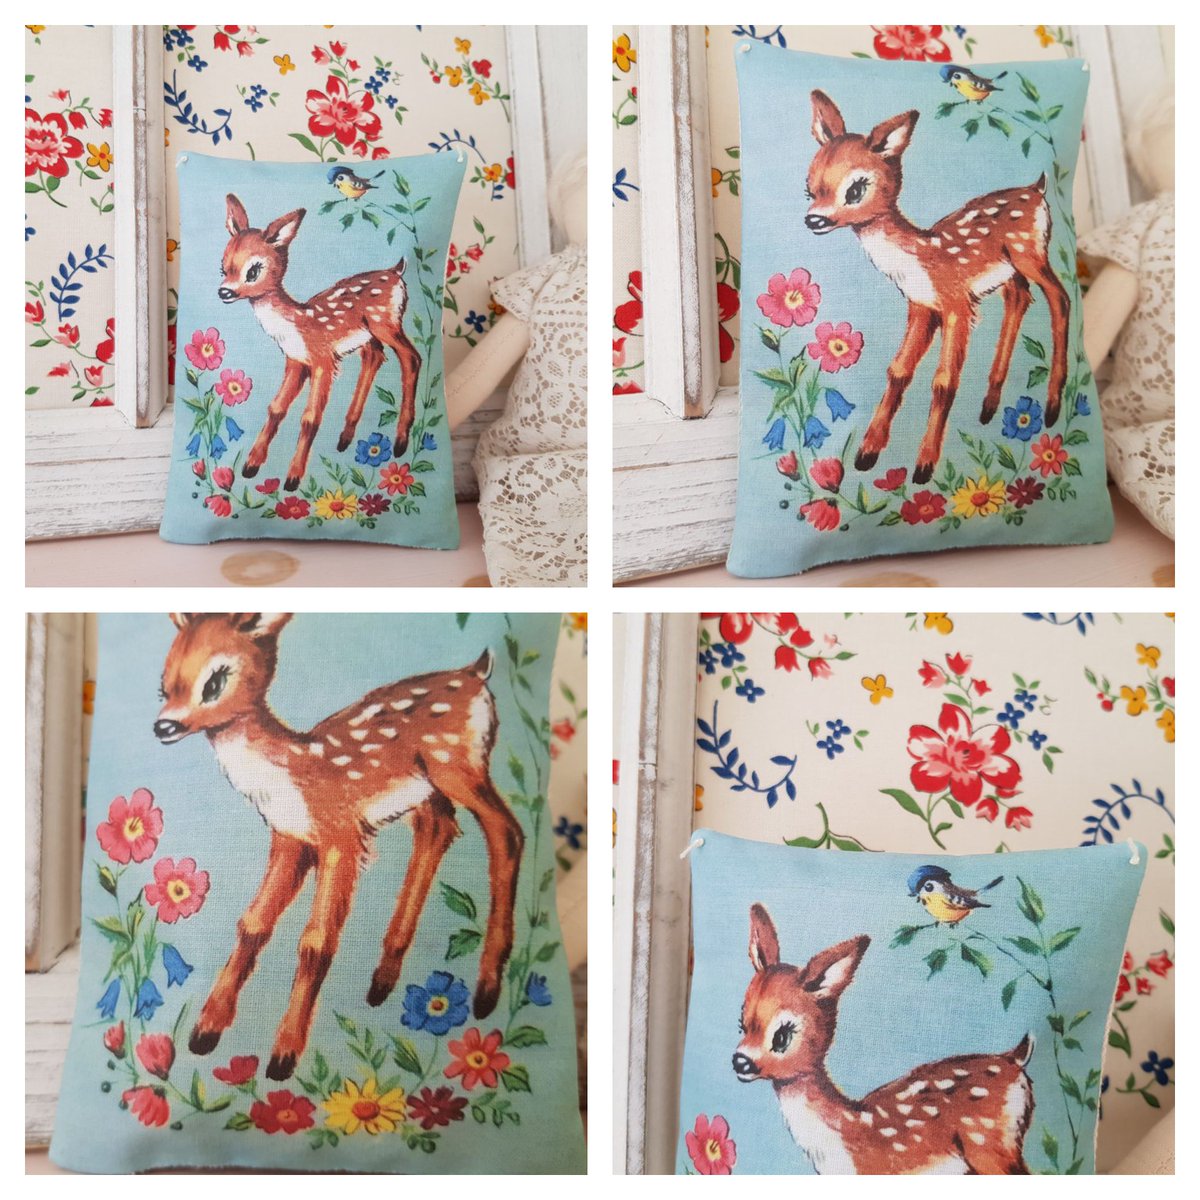 This cheery 'Bambi' lavender bag comes ready to hang so perfect hung from a door or drawer. It can also be scented with rose petals if you prefer. #earlybiz #craftbizparty #lavenderbag 
sarahbenning.etsy.com/listing/117596…